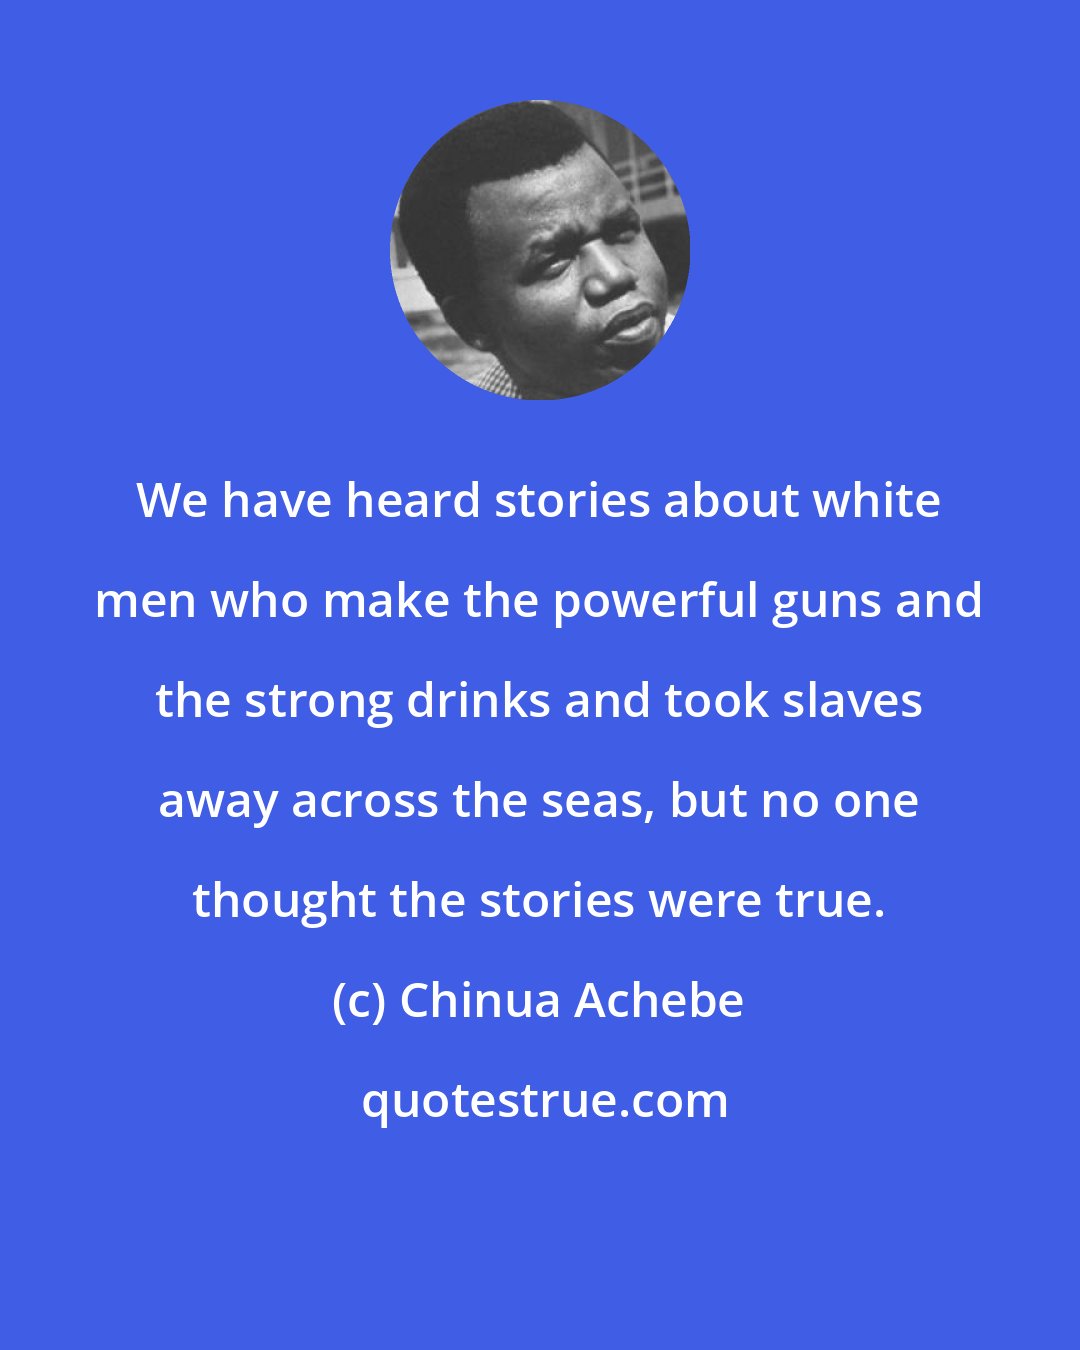 Chinua Achebe: We have heard stories about white men who make the powerful guns and the strong drinks and took slaves away across the seas, but no one thought the stories were true.